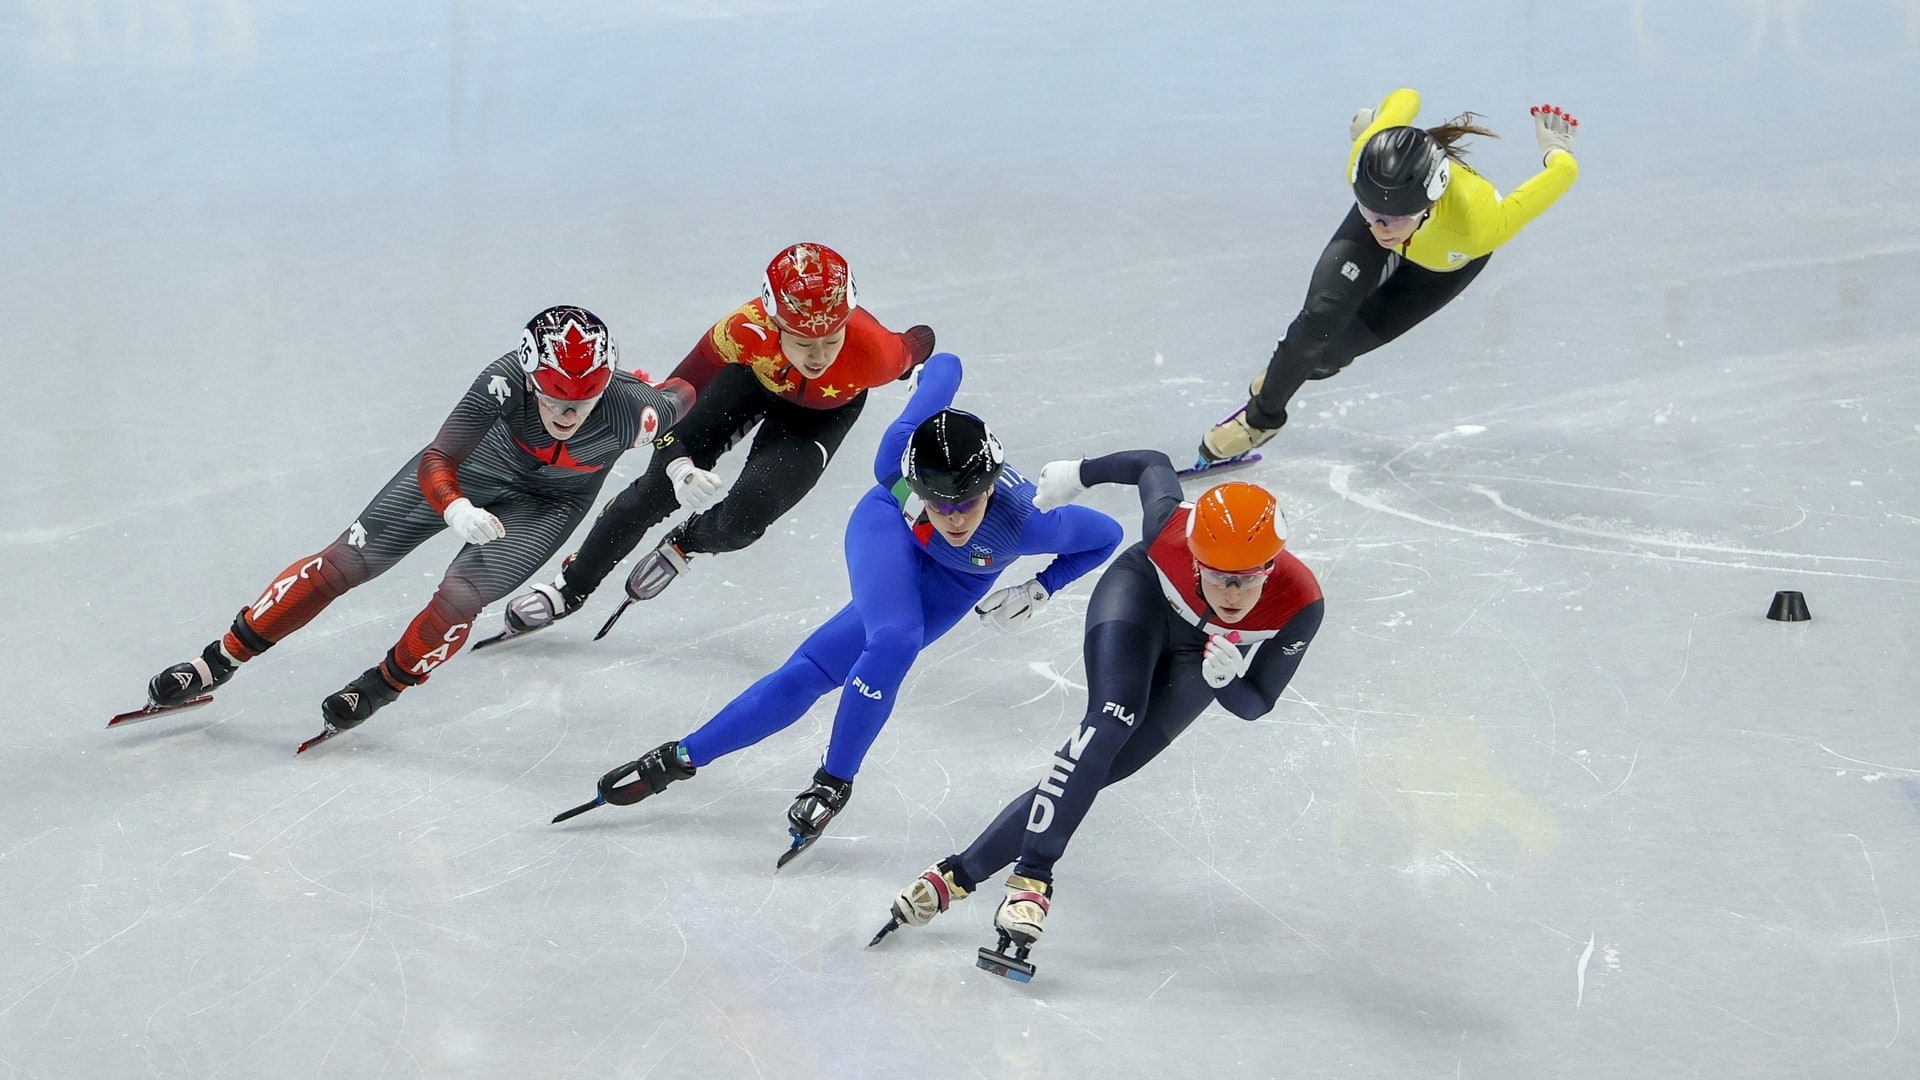 Speed Skating: Suzanne Schulting, Kim Boutin, Yuting Zhang, Hanne Desmet, Women's 500 m Final, Day three. 1920x1080 Full HD Background.